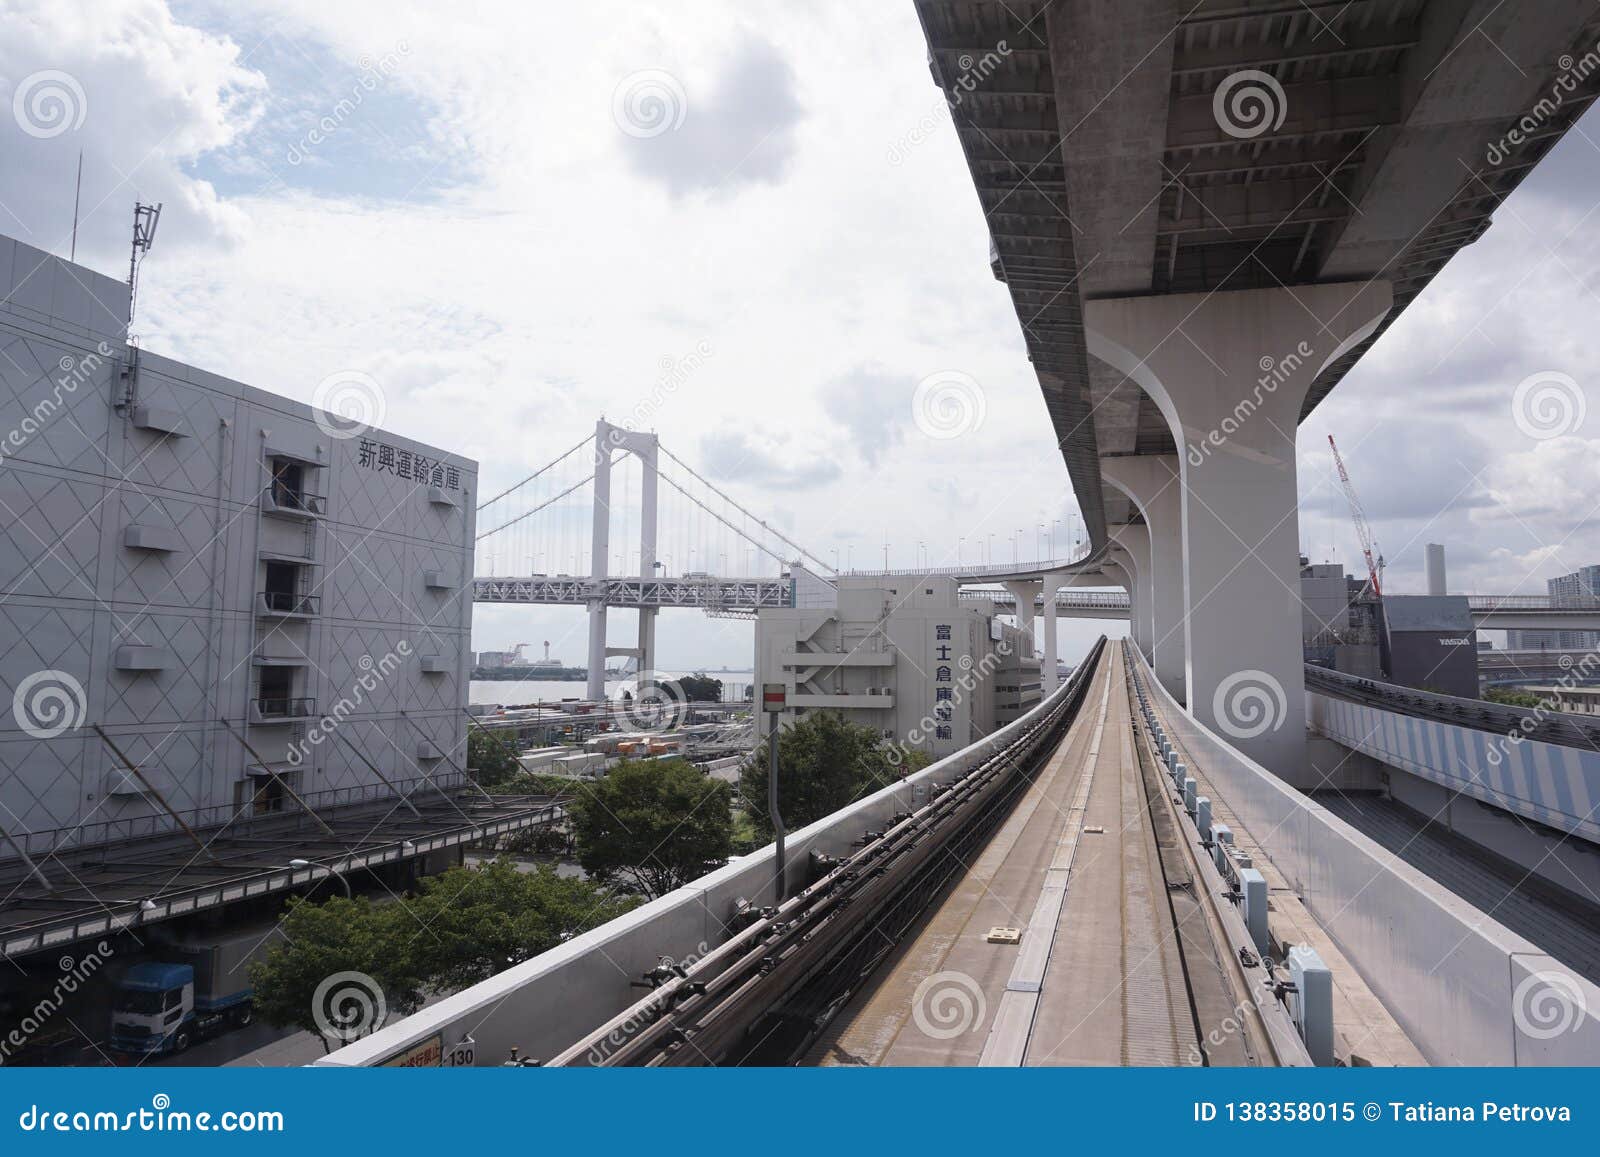 Scenery Of A Train Traveling On The Elevated Rail Of Yurikamome Line In Odaiba Road Under The Bridge Editorial Image Image Of Bridge Odaiba